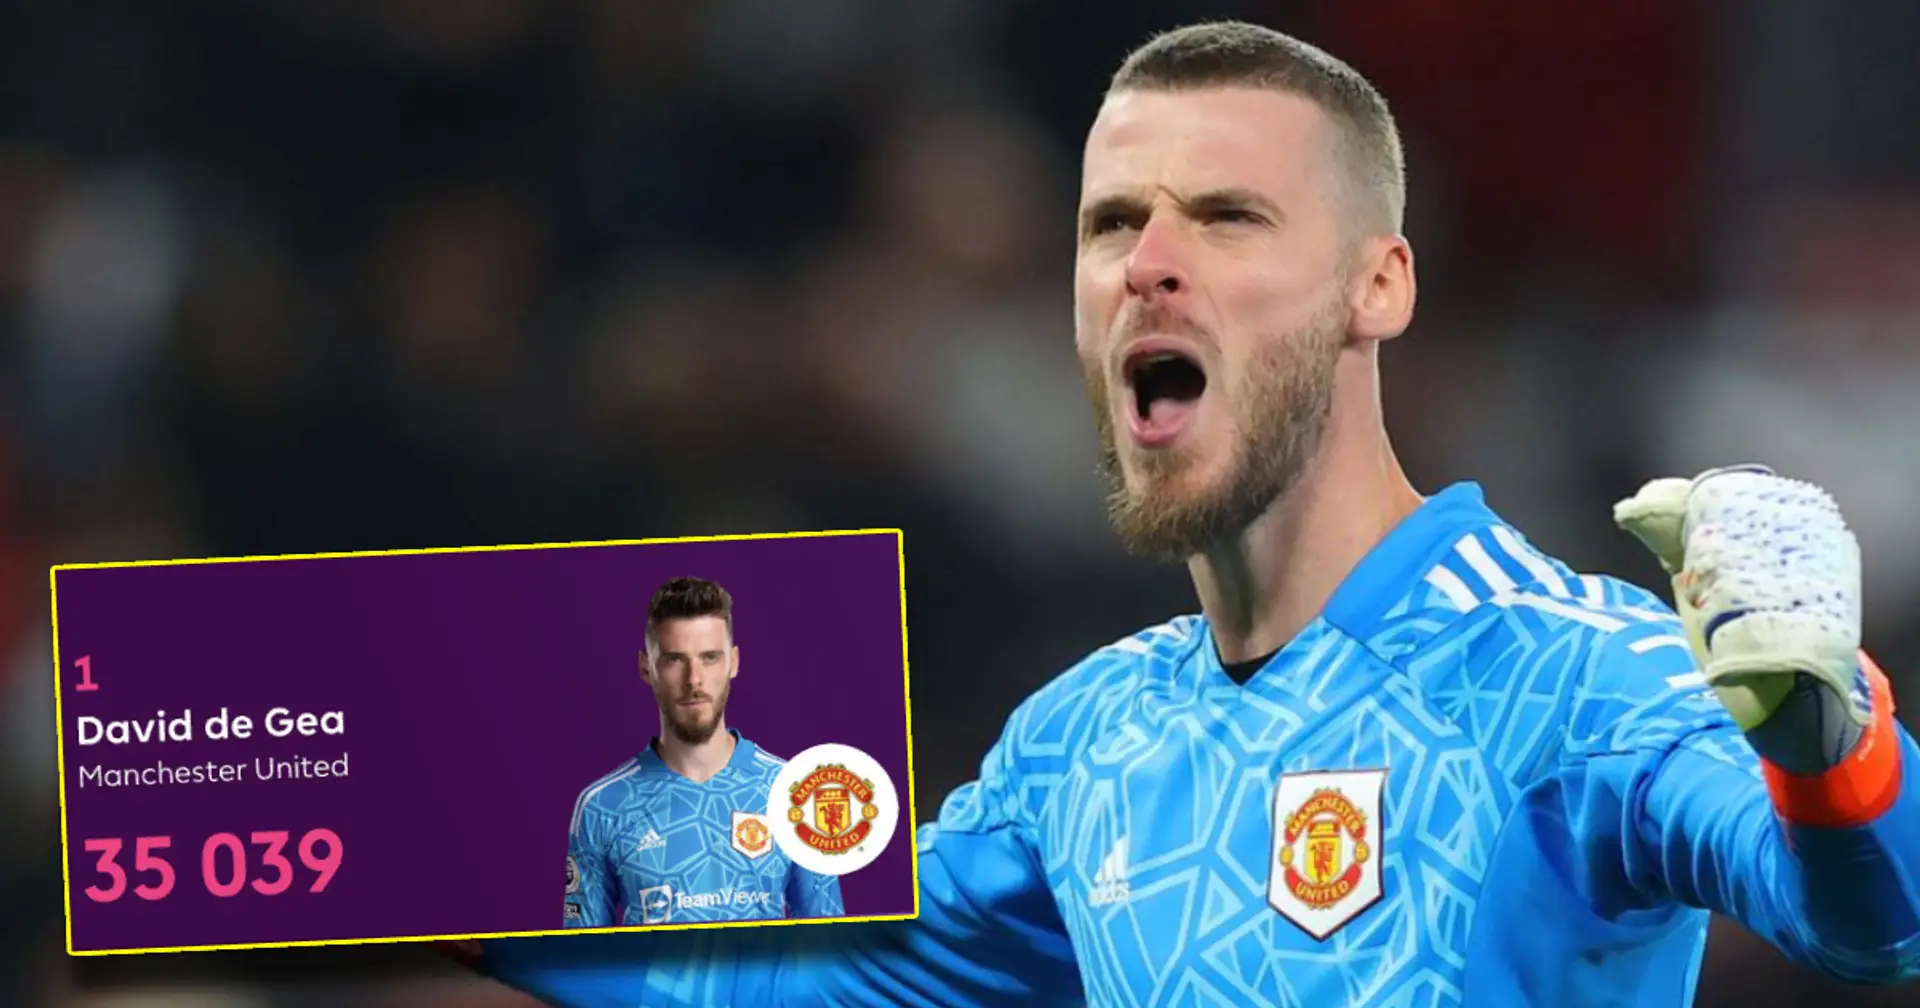 De Gea officially becomes player with most minutes played in Premier League